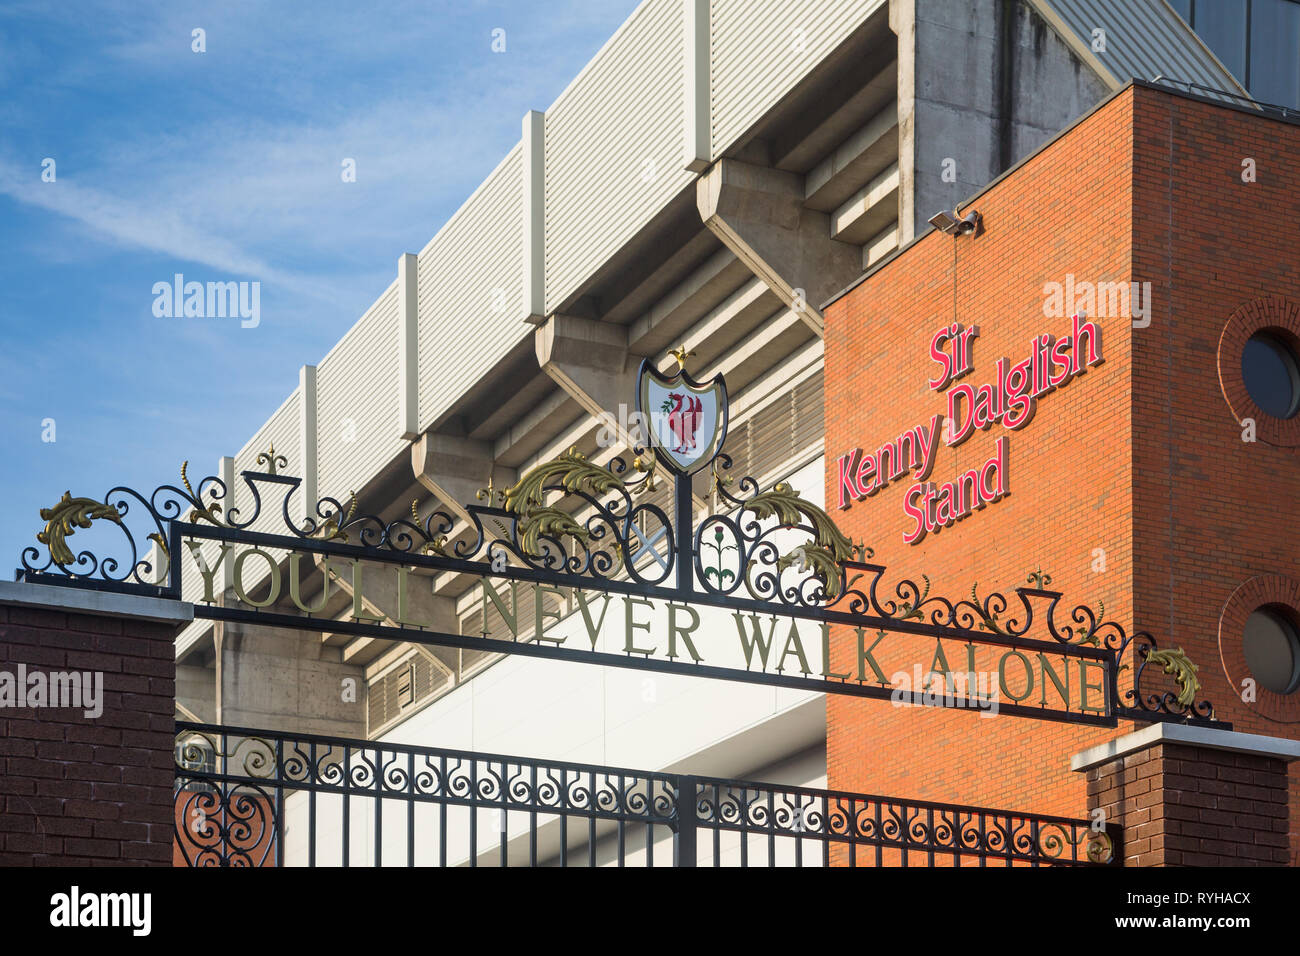 Ornate 'You'll Never Walk Alone' wording above black metal gates near The Kenny Dalglish stand at Liverpool Football Club Anfield Road Stadium, UK. Stock Photo